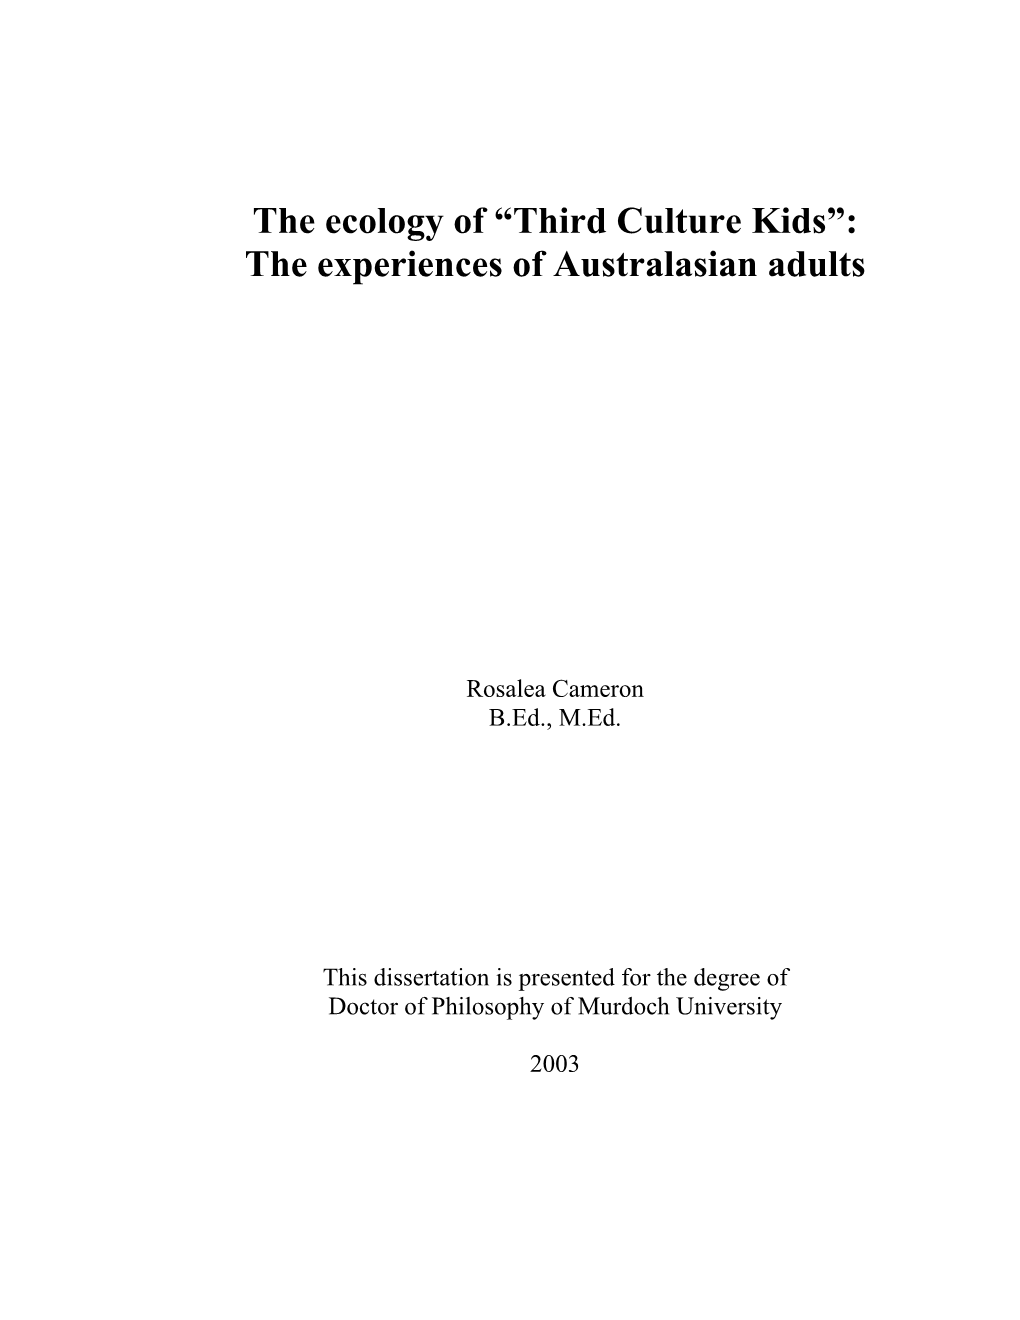 Third Culture Kids”: the Experiences of Australasian Adults